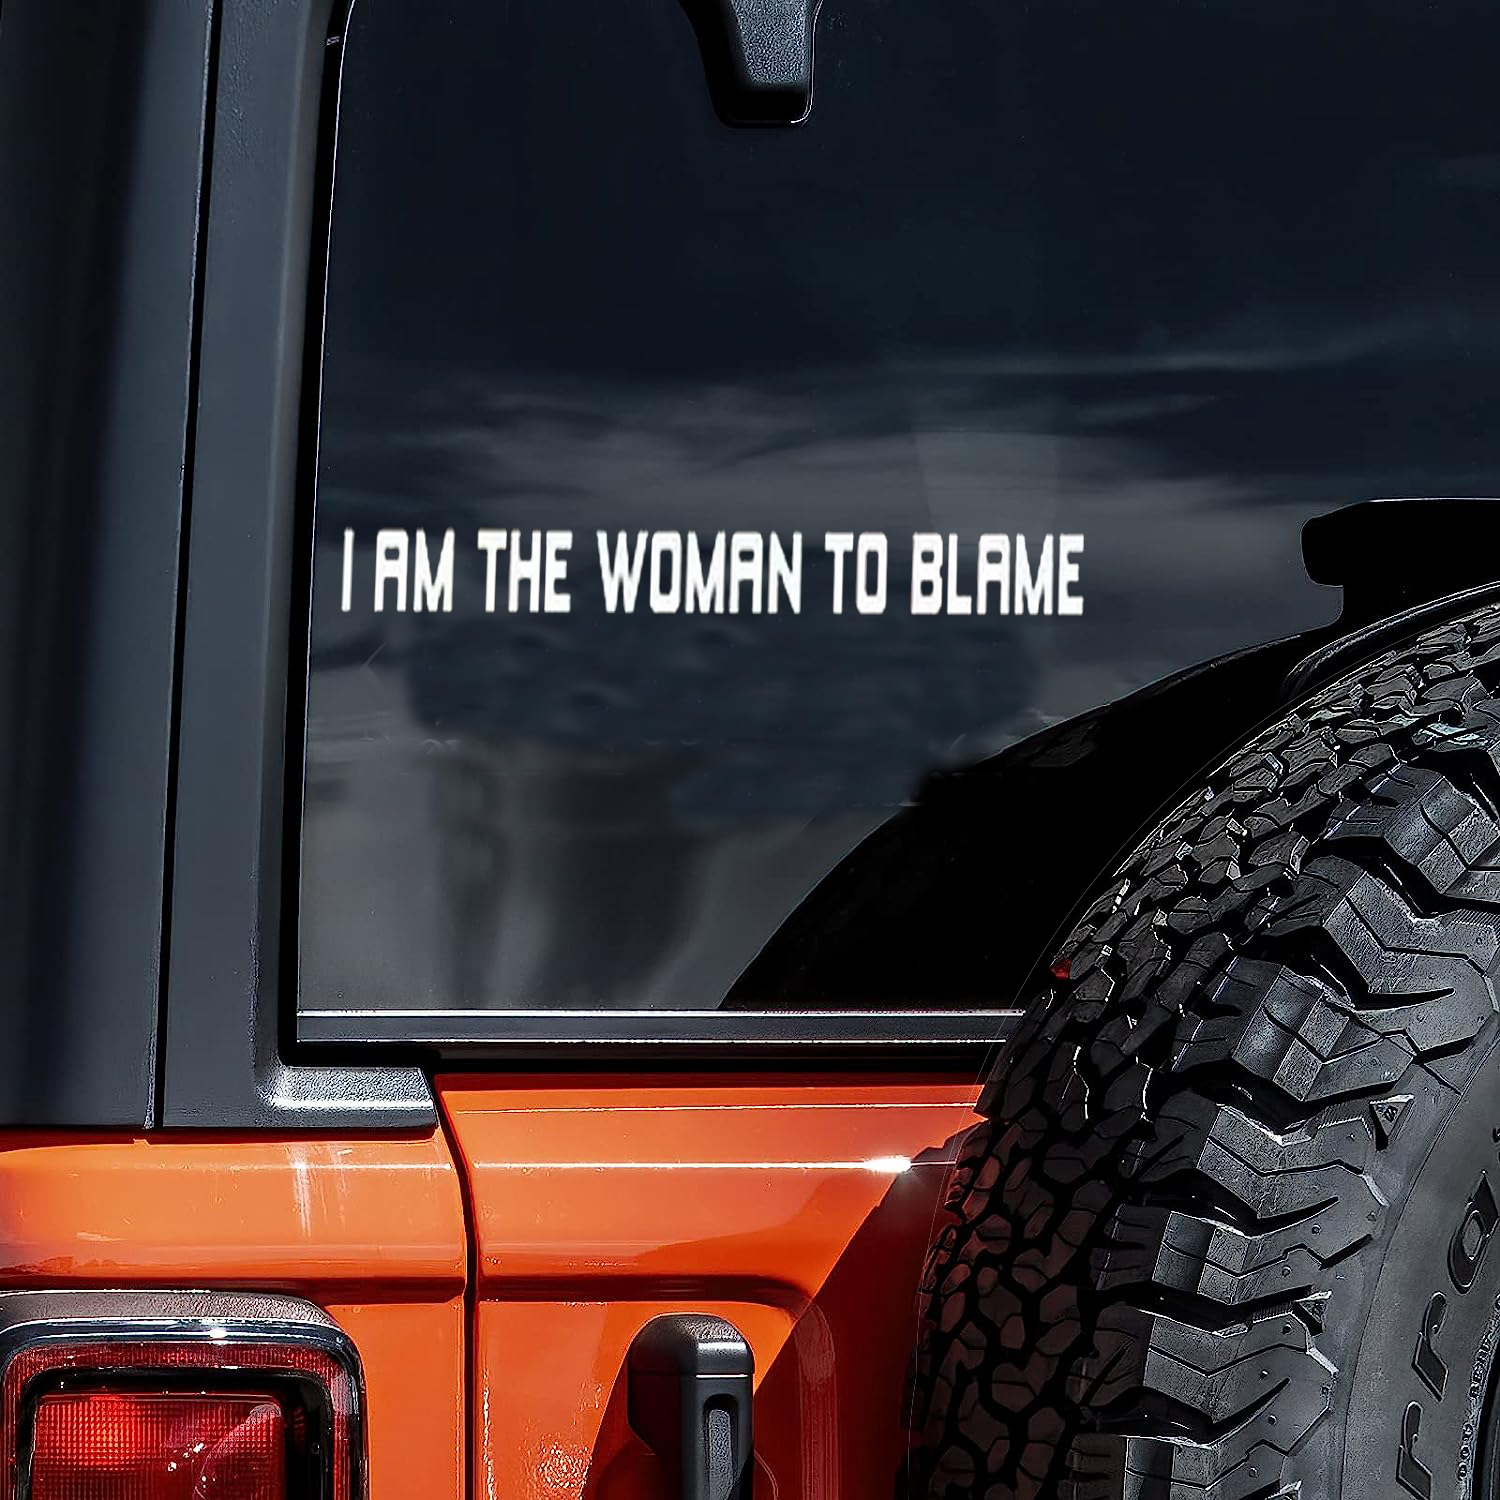 I AM THE WOMAN TO BLAME Car Sticker For Laptop Bottle Truck Vehicle Paint  Window Wall Cup Fishing Boat Skateboard Decals Automobile Accessories